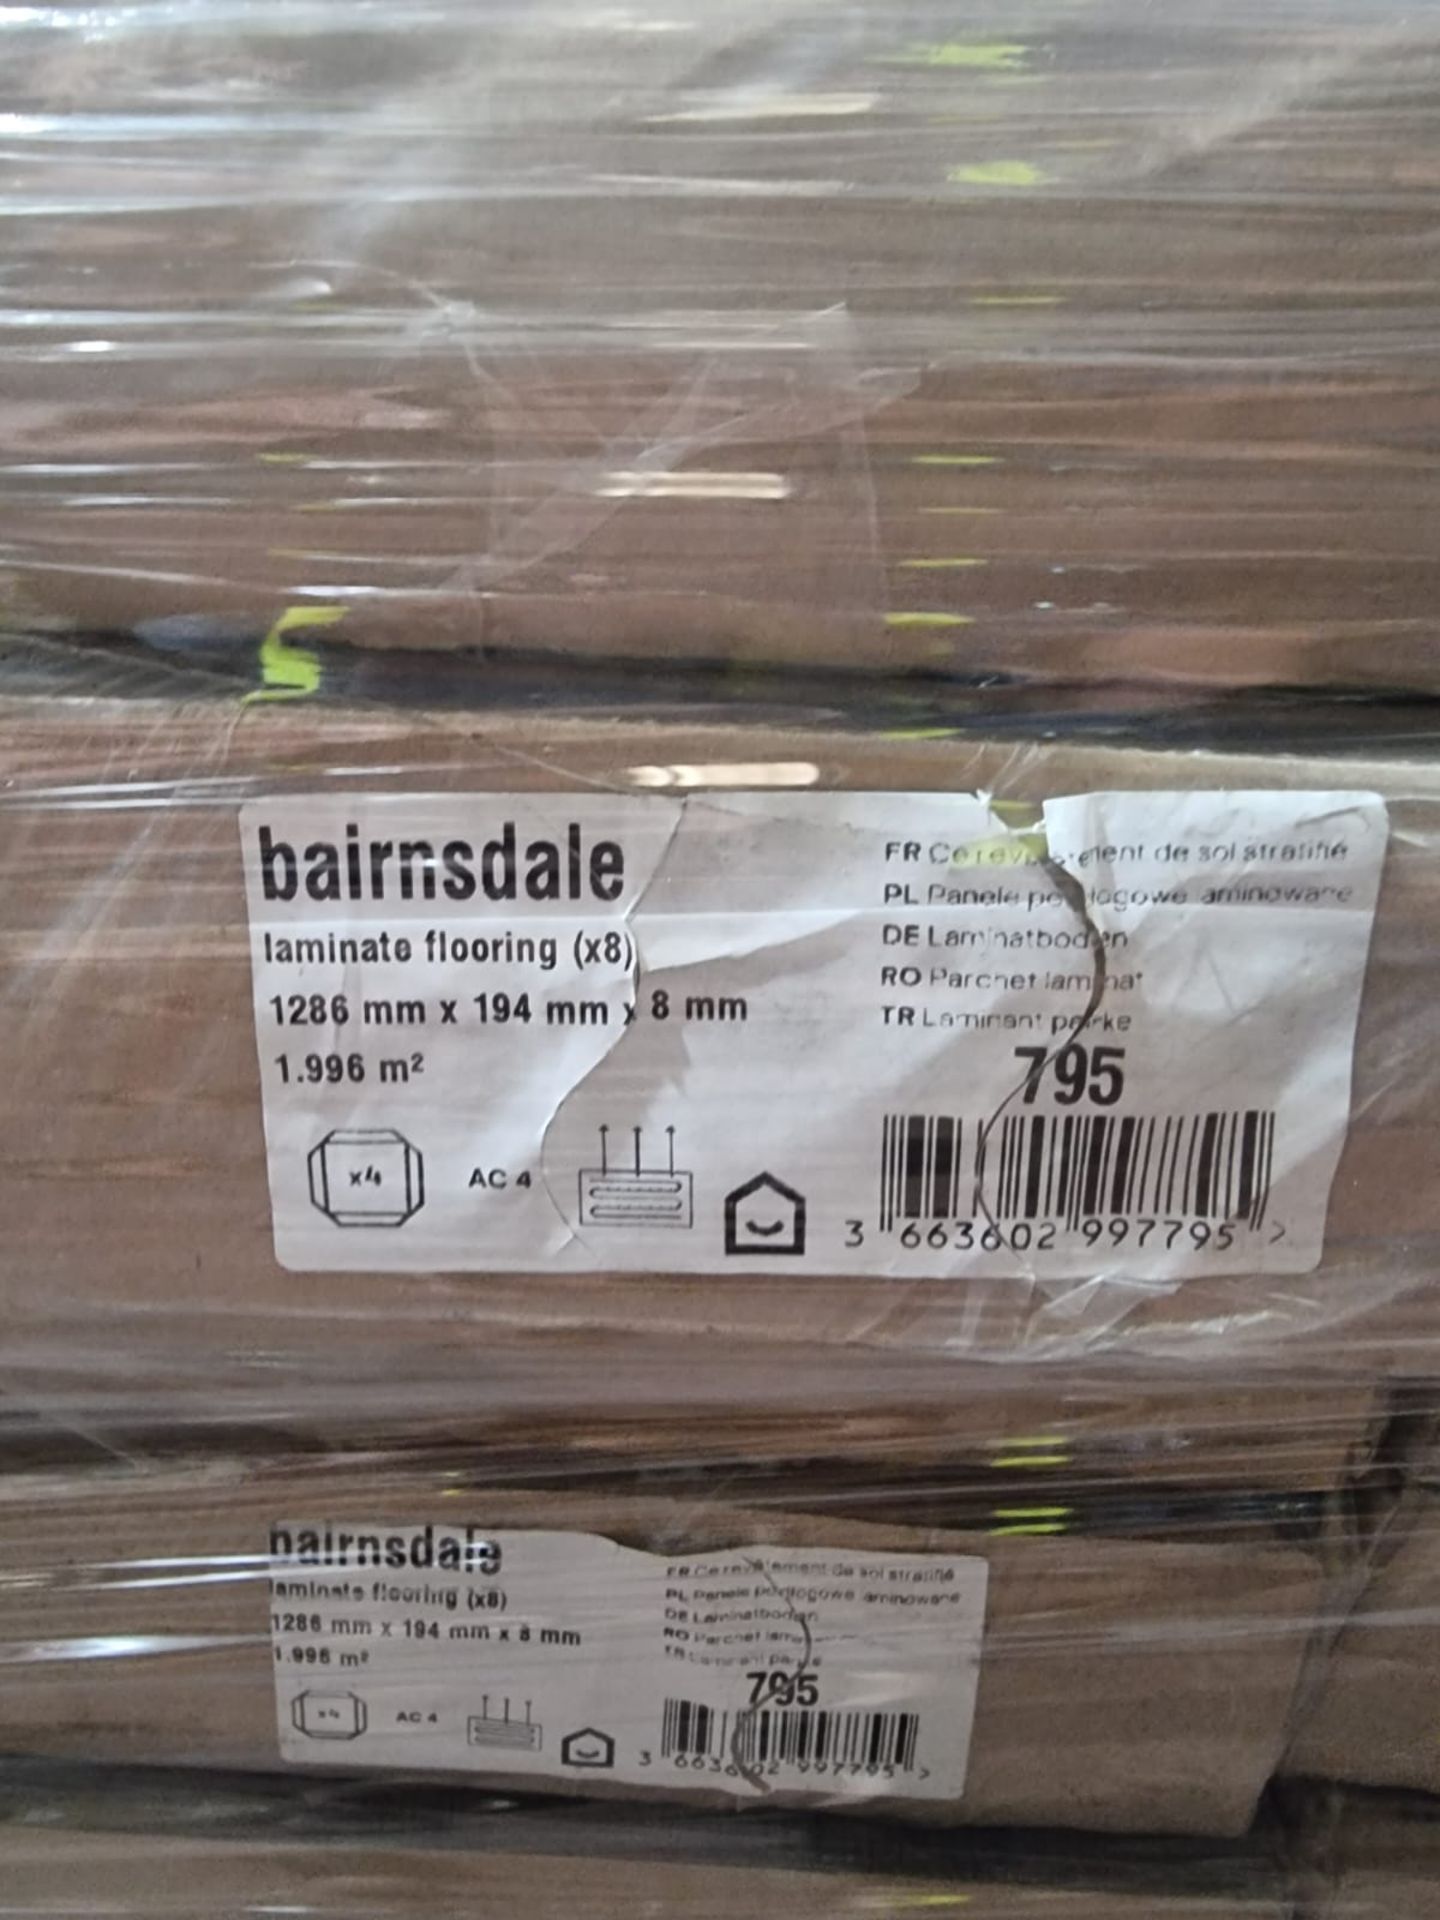 PALLET TO CONTAIN 20 X PACKS OF BAINSDALE DARK GREY WOOD LAMINATE FLOORING. EACH PACK CONTAINS 1. - Image 3 of 3